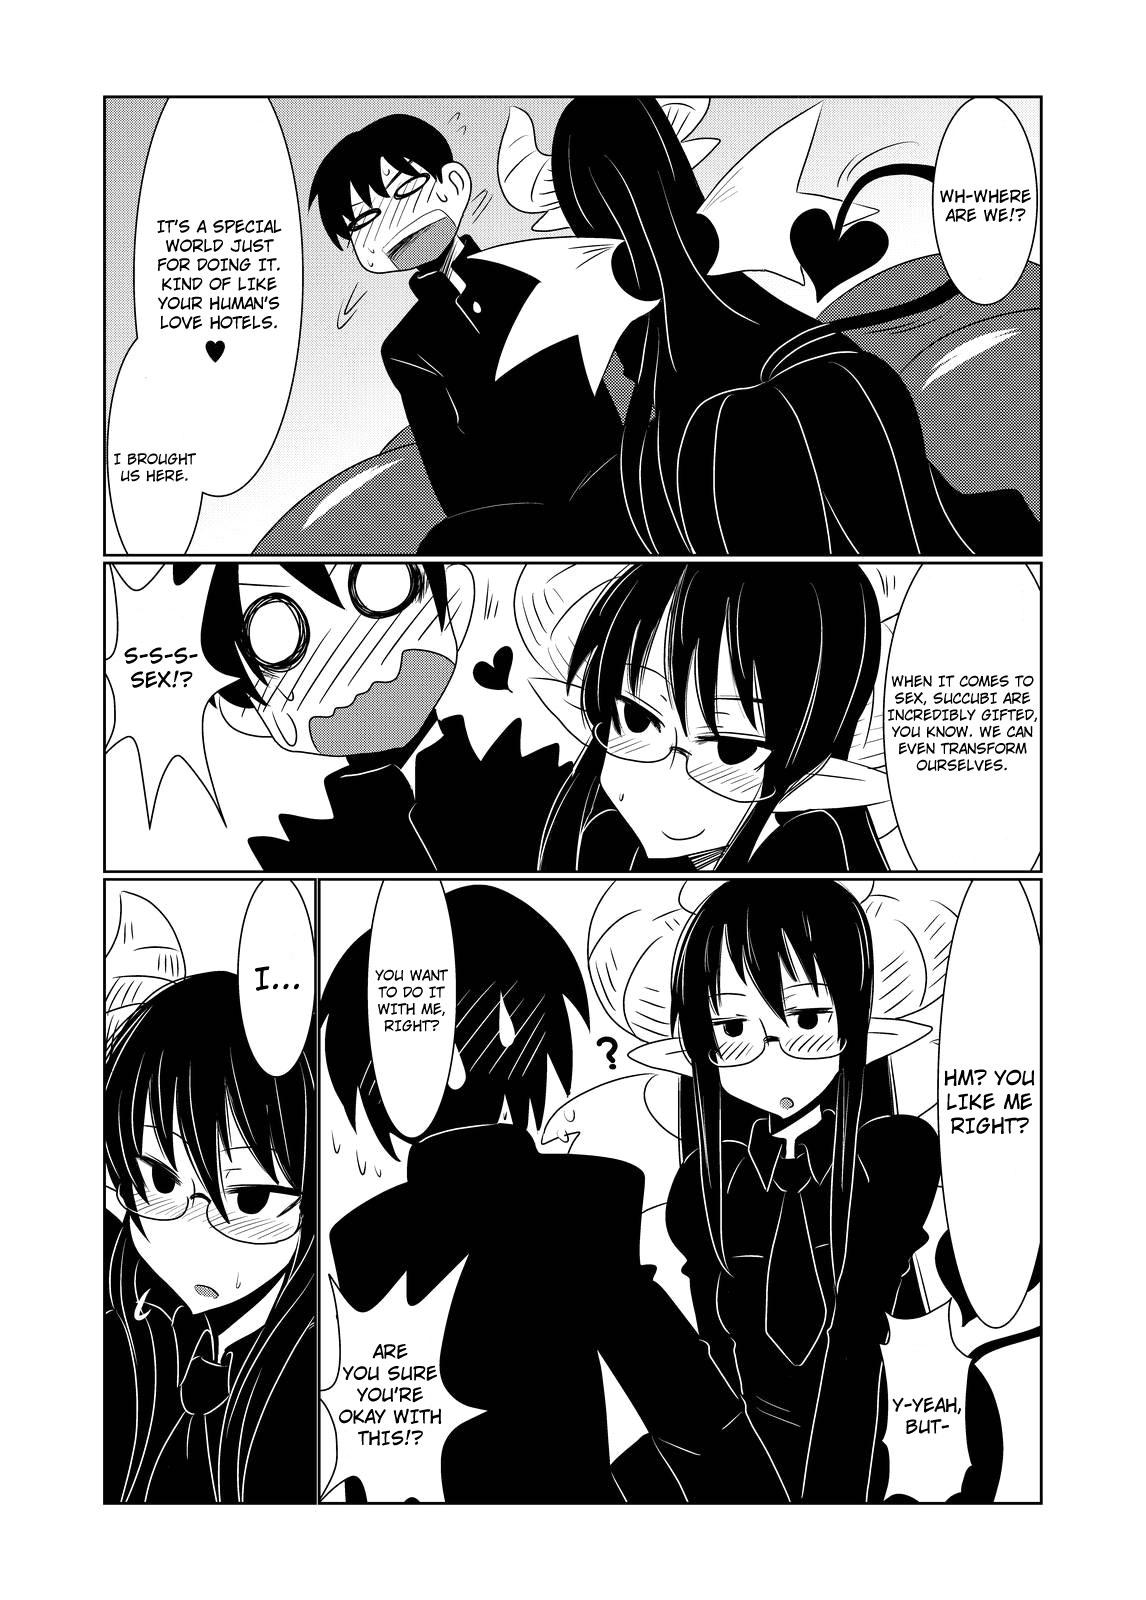 Cfnm JK Succubus no Renai Jijou. | Thoughts on Love by a Female High School Succubus Rimjob - Page 8